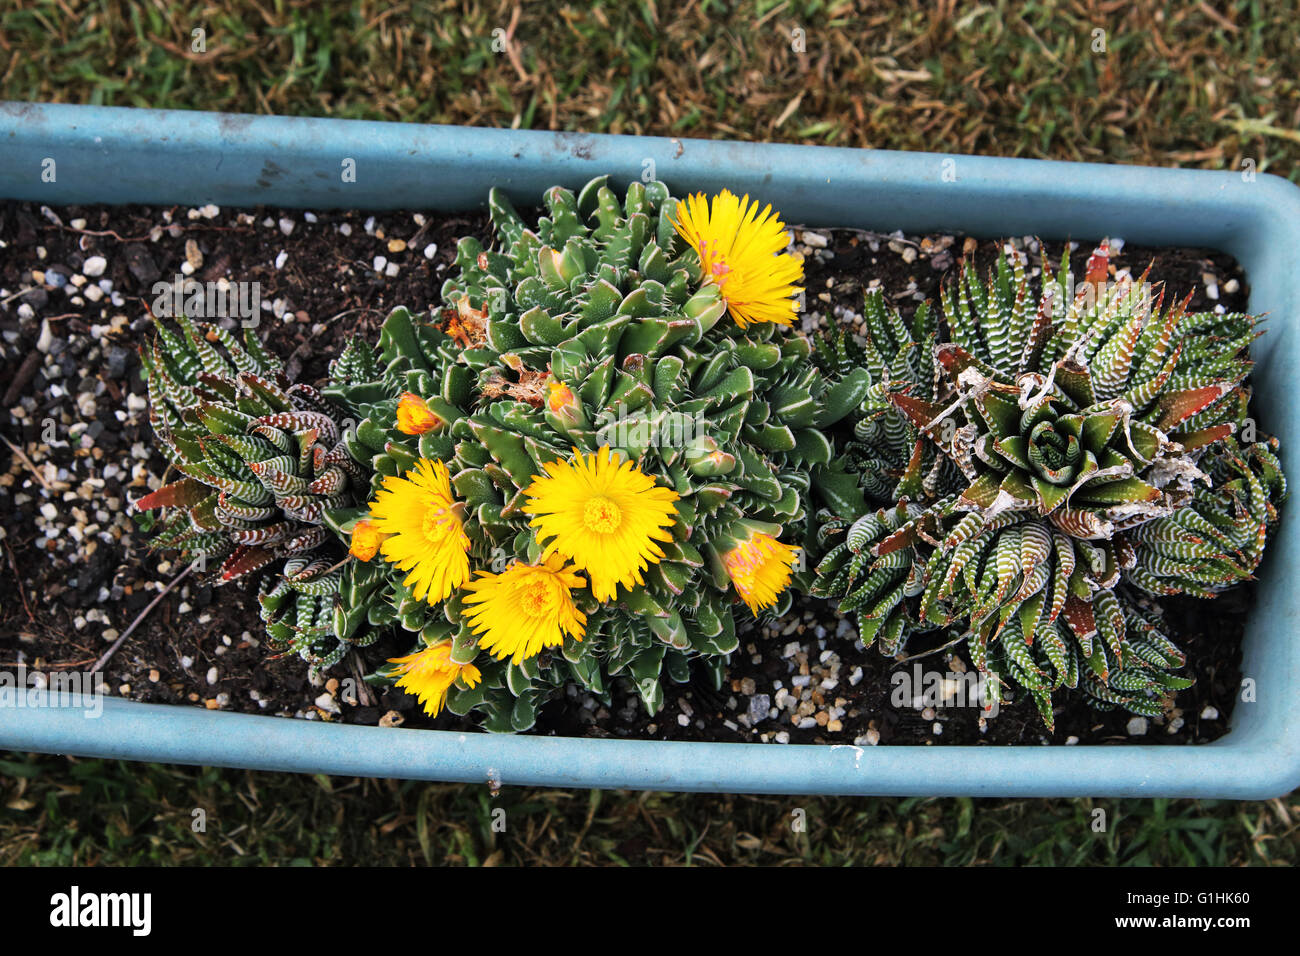 Tiger jaws succulent plant or known as Faucaria tigrina with yellow flowers Stock Photo